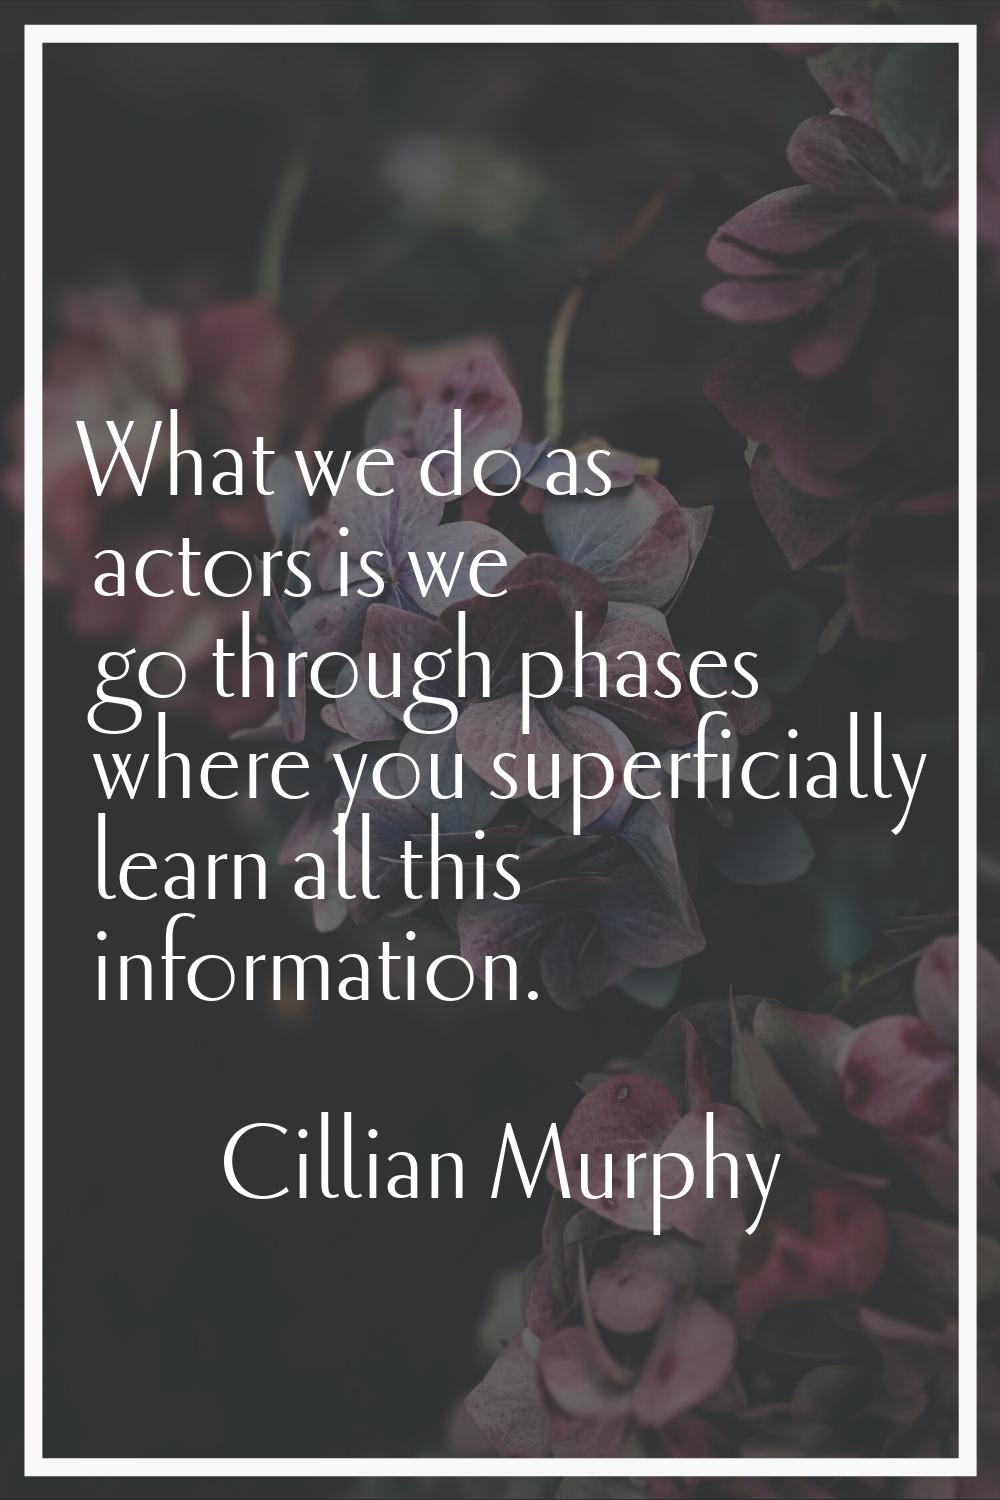 What we do as actors is we go through phases where you superficially learn all this information.